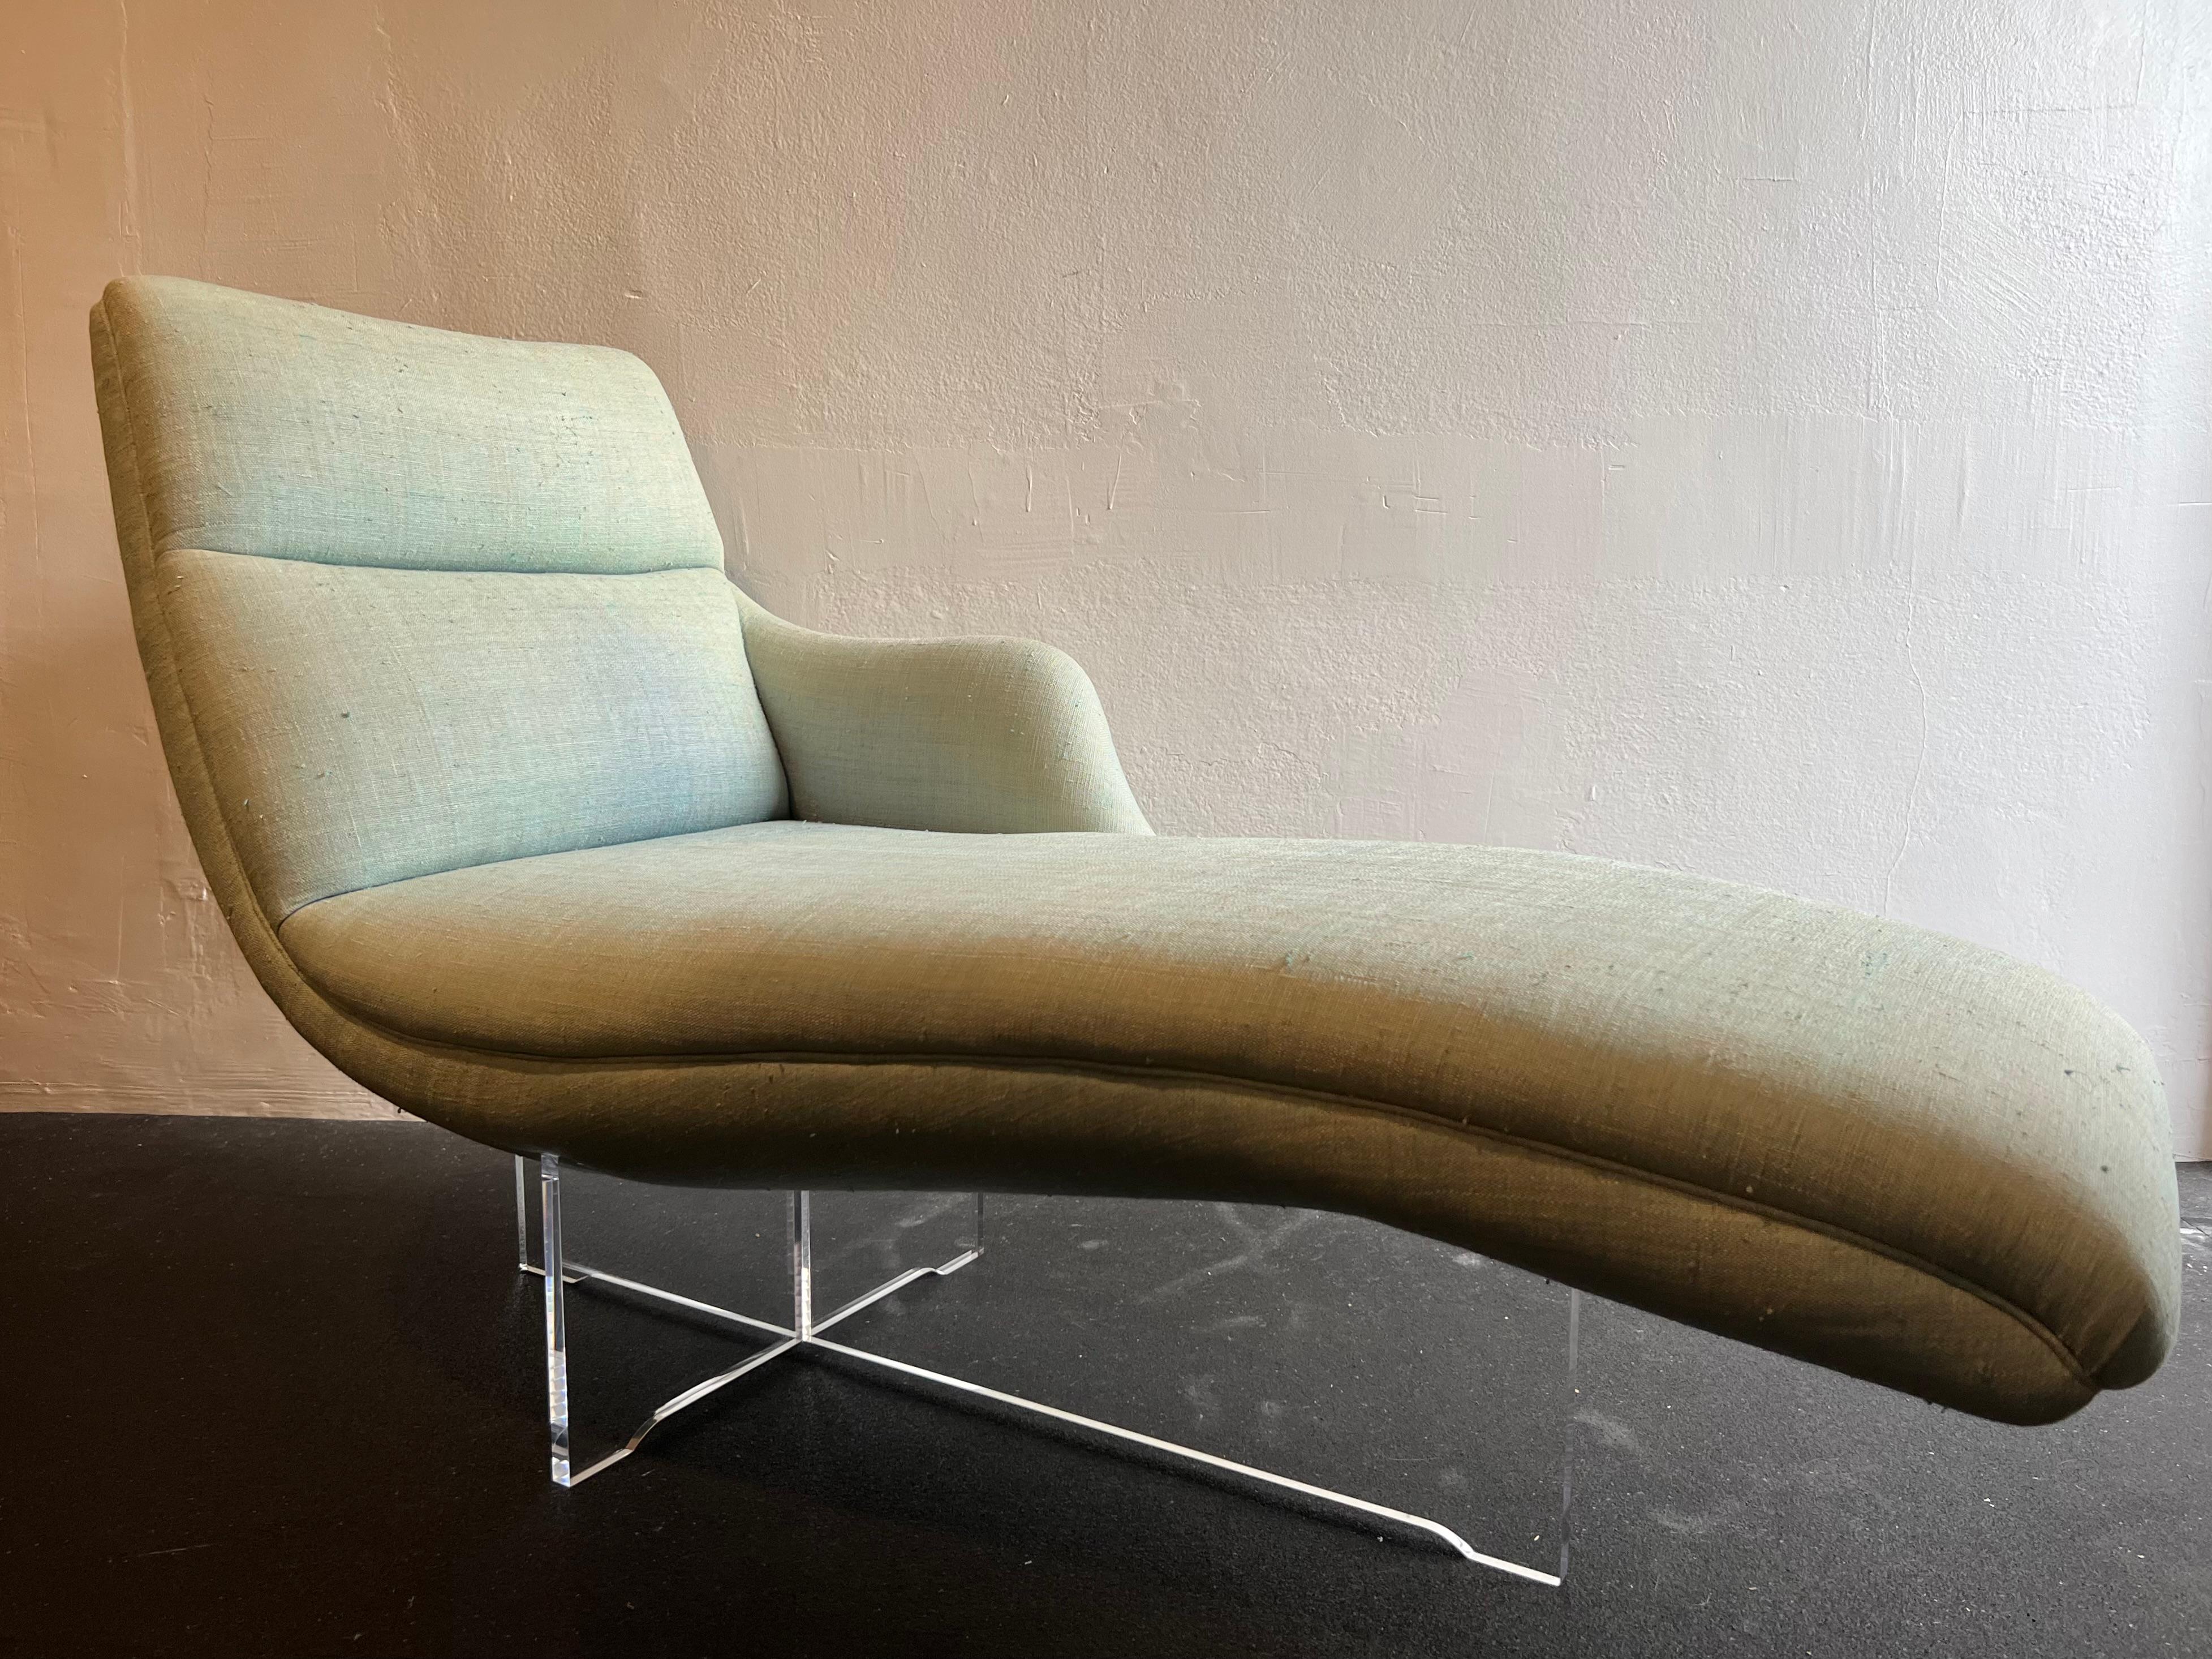 Iconic Vladimir Kagan Erica chaise lounge on lucite base. Although there are no rips or tears in the original upholstery, reupholstery is highly recommended (please refer to photos). The lucite is in excellent vintage condition. Additional photos